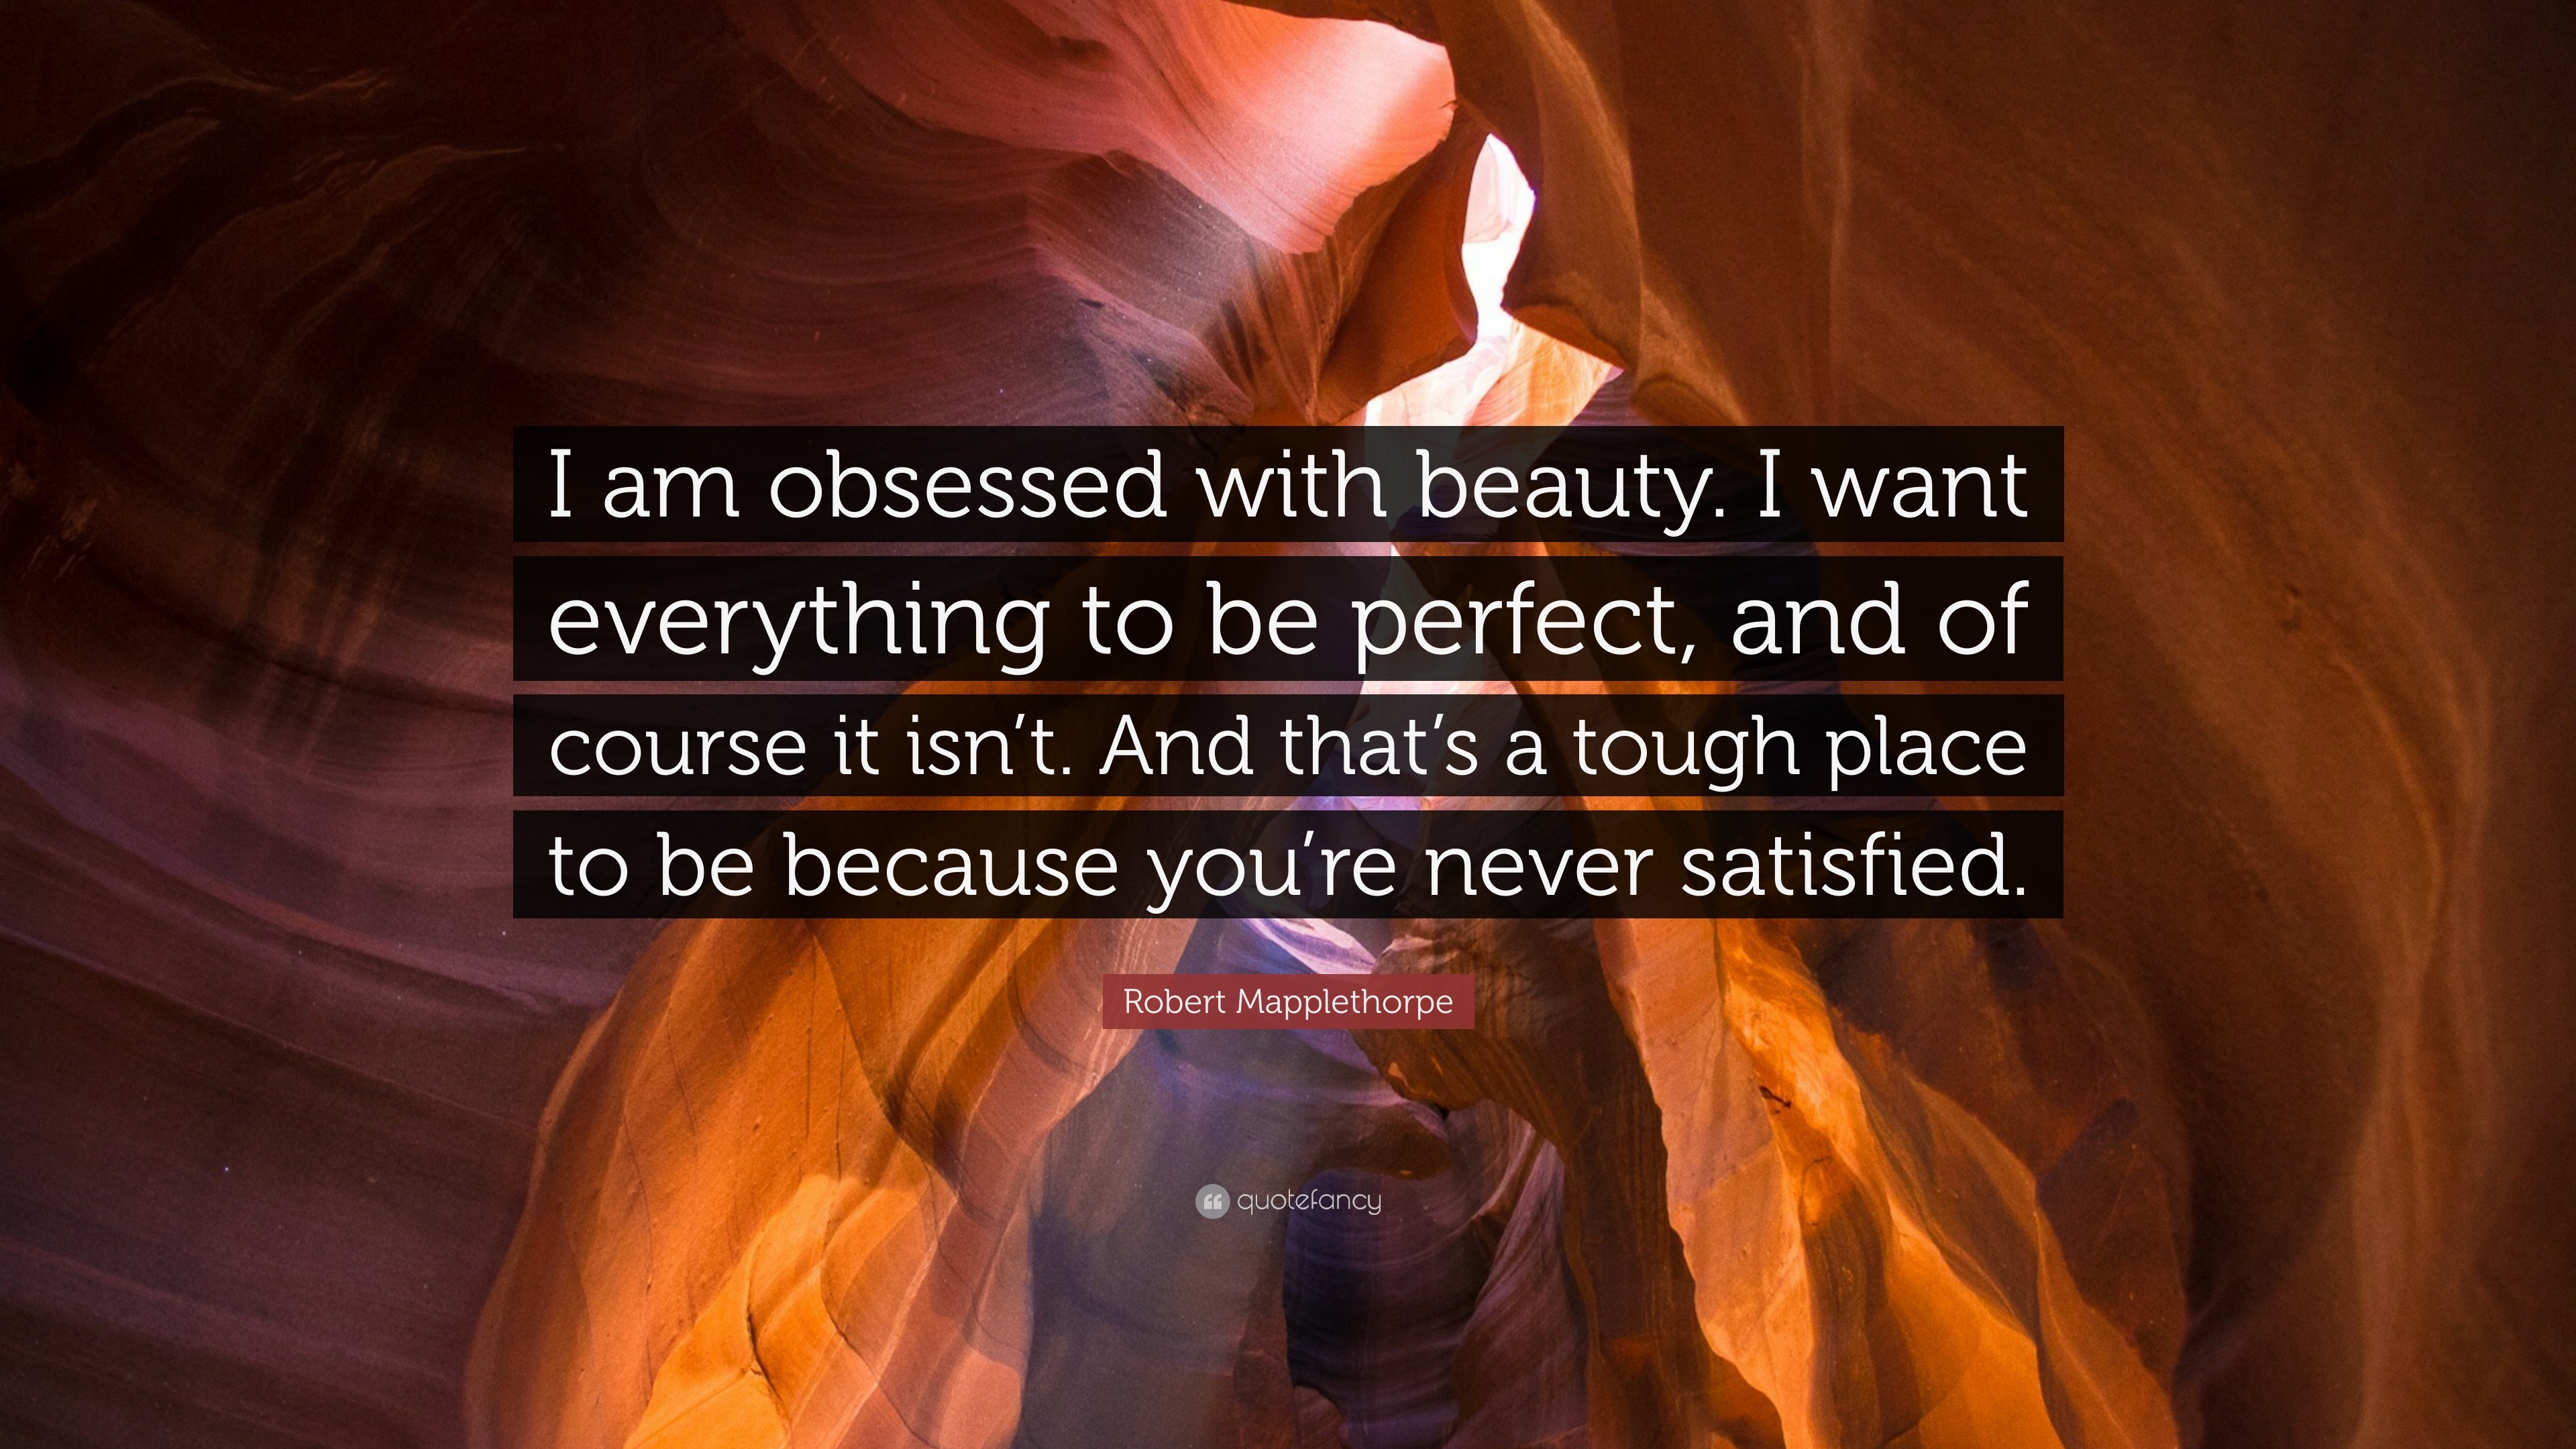 10+ Quotes On Obsessed